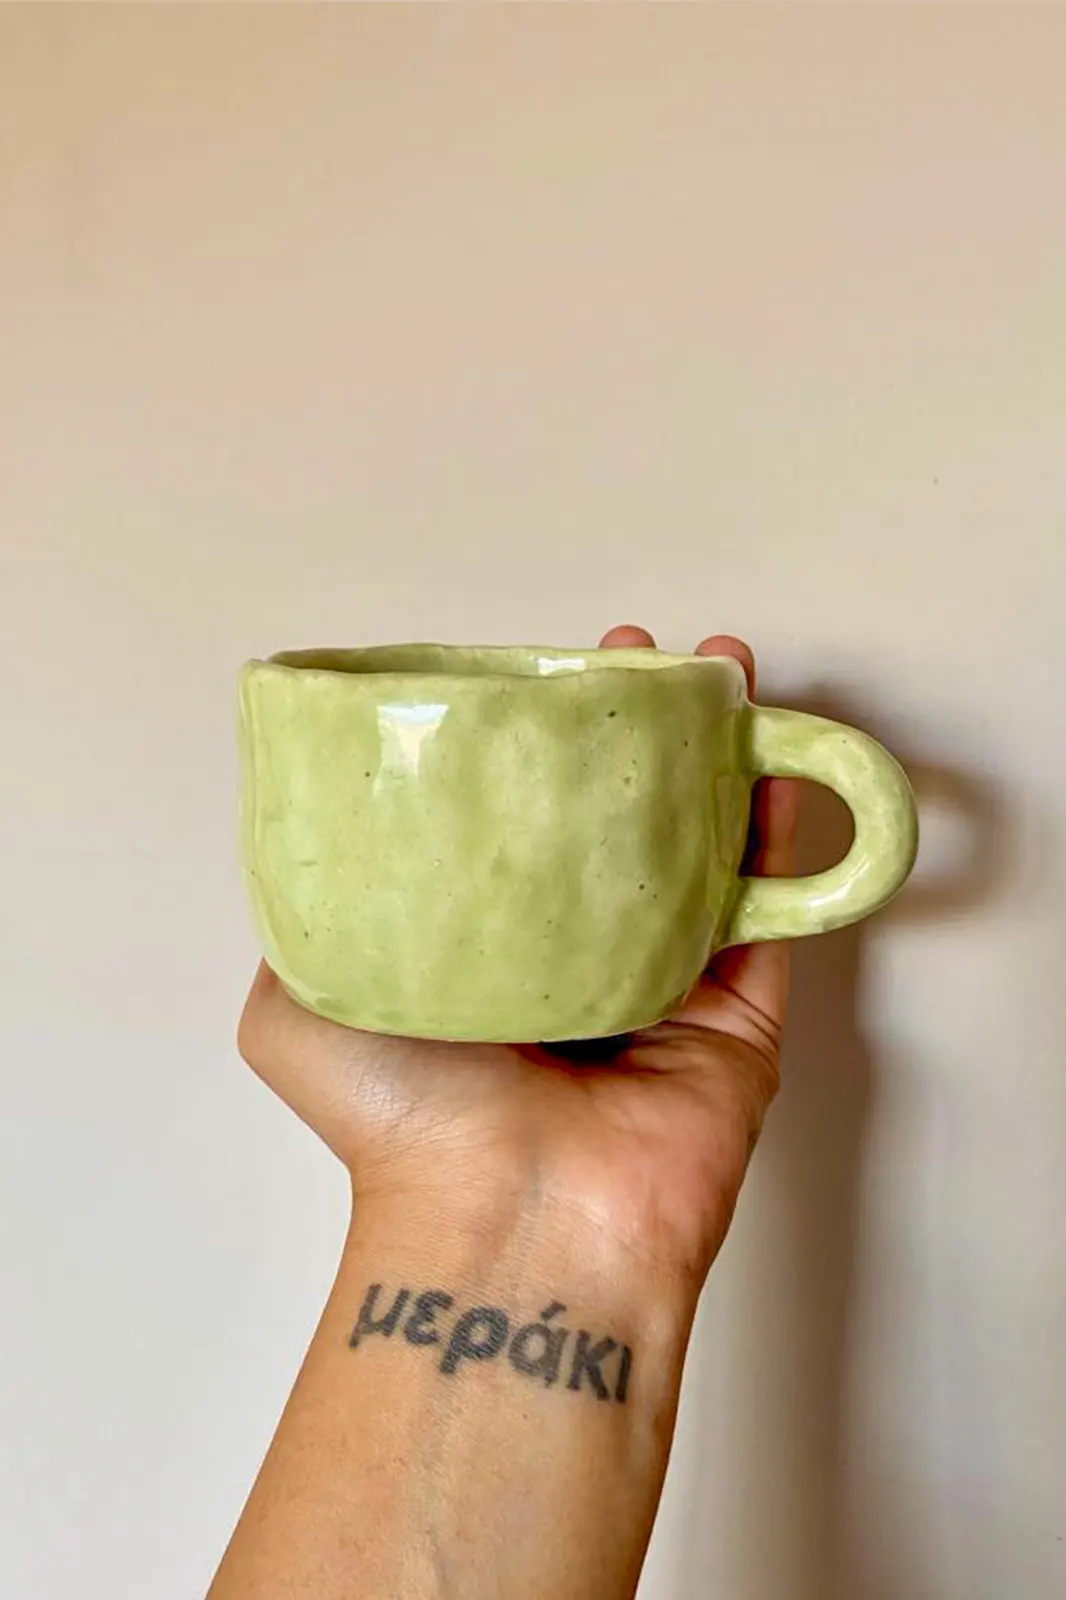 Olive ceramic hand pinched daisy print coffee tea mug set of 4, tea cup, ceramic tea cup, coffee cup, green cup, ceramic mugs, coffee mug, hand painted mug, handmade mug, coffee mug ceramic, eco friendly coffee cup, coffee mug, eco friendly mugs, hand painted mug, handmade mug, coffee mug ceramic, Toh, Sepia Stories